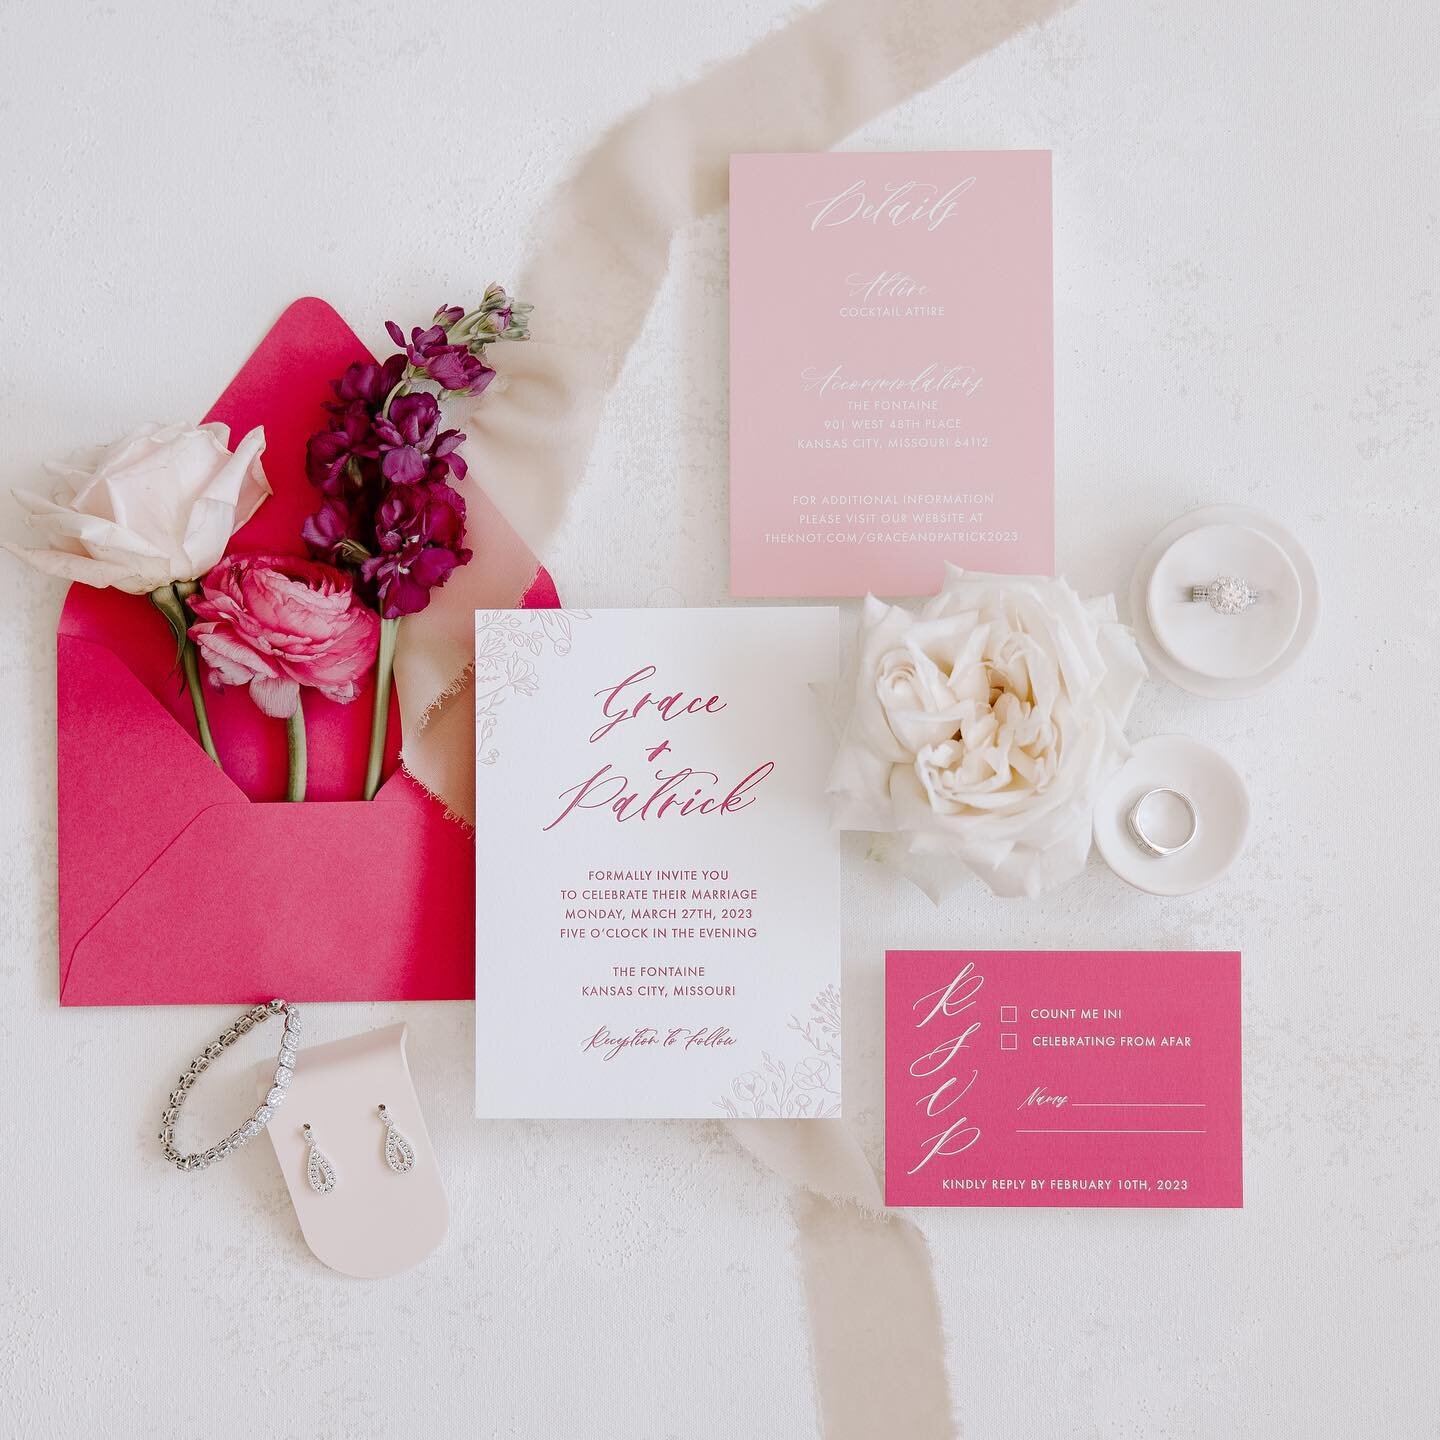 Love is in full bloom! 🌸💕 Our pink floral wedding invitation suite is the perfect way to invite your guests to share your special day 

Venue:&nbsp;@thefontainehotel
Planner:&nbsp;@theperfecttouchkc
Photo: @abbeyregnier.photography
Film:&nbsp; @hea